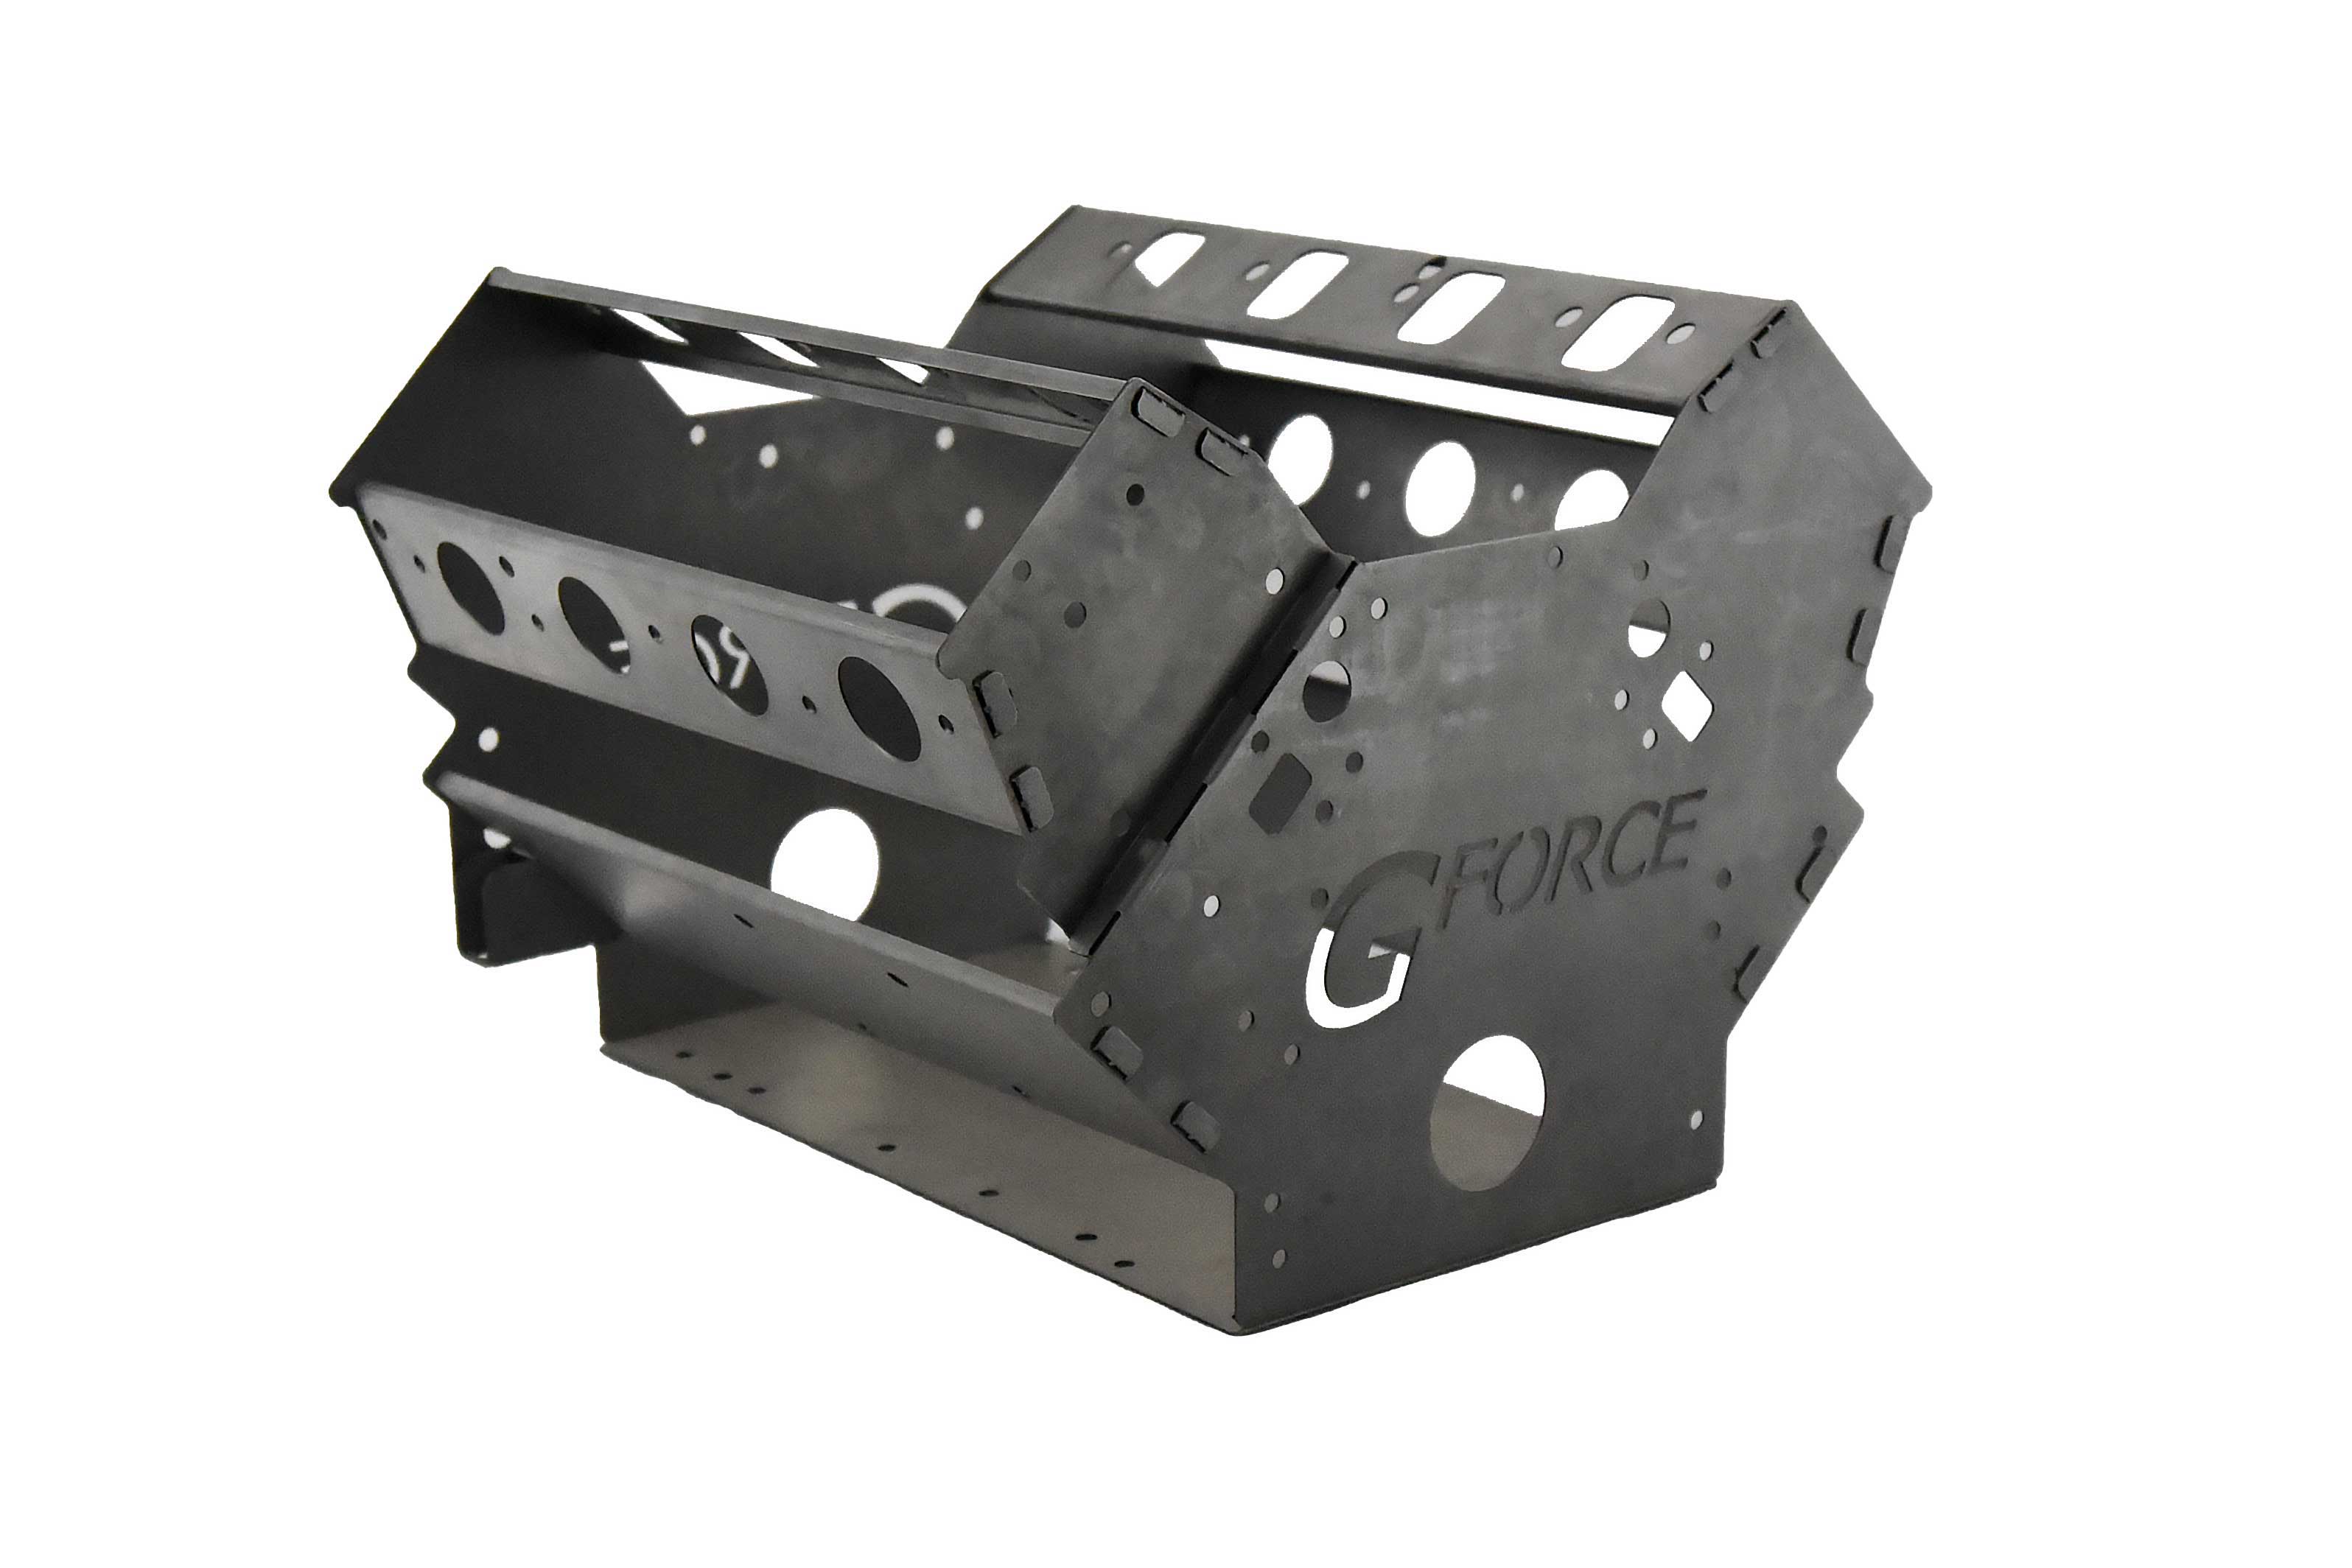 LT Engine Mock-Up Block Swap Block™ from G Force Performance Products